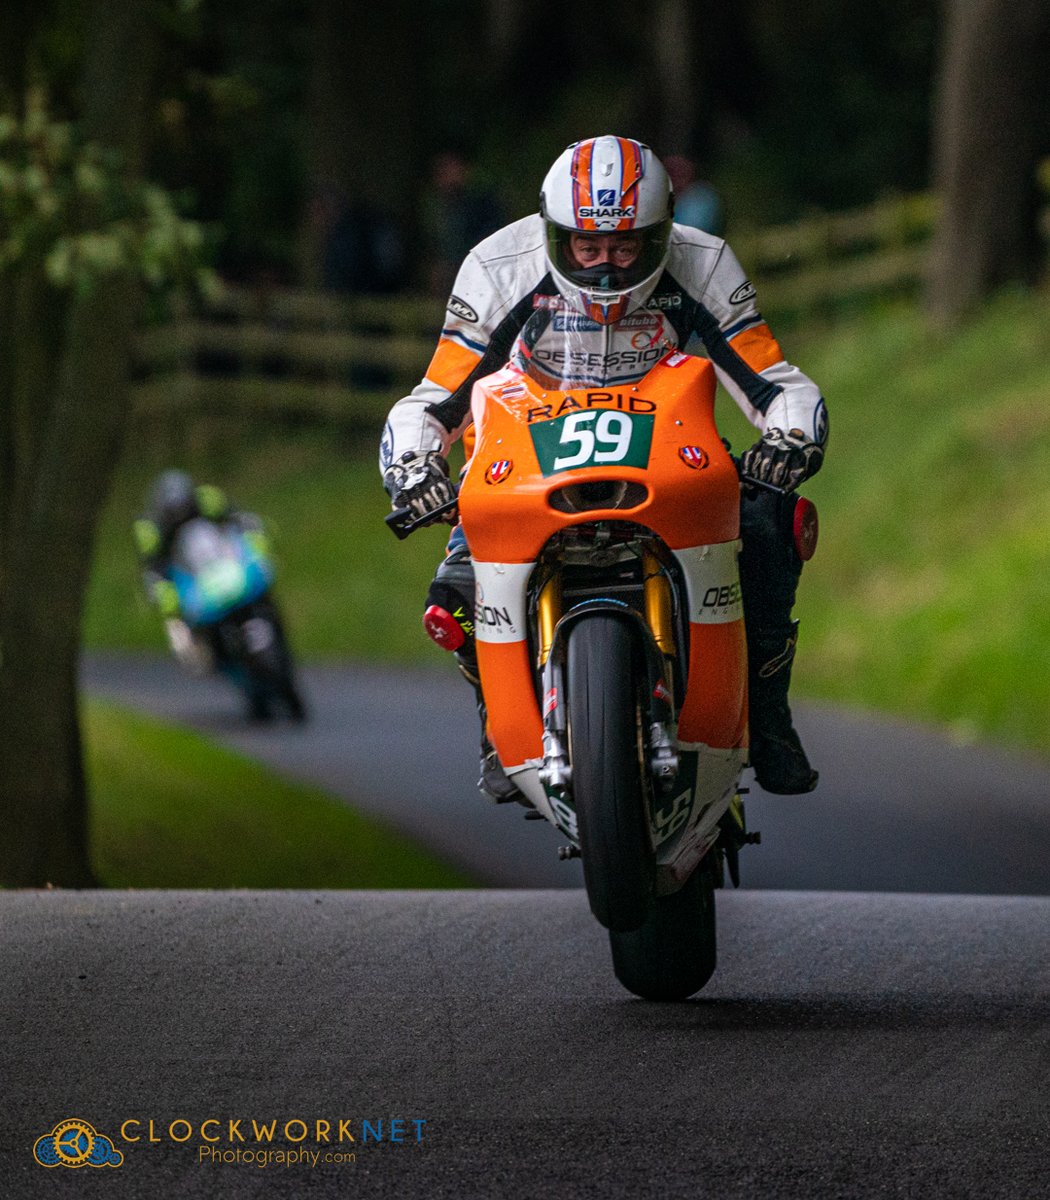 A nice byproduct of a trip to @MountOlivers, is plenty of content for #WheelieWednesday. Dave Hewson through Jefferies Jumps during the final race of the Steve Henshaw Gold Cup meeting. | #roadracing #oliversmount #scarborough #ukmotorsport